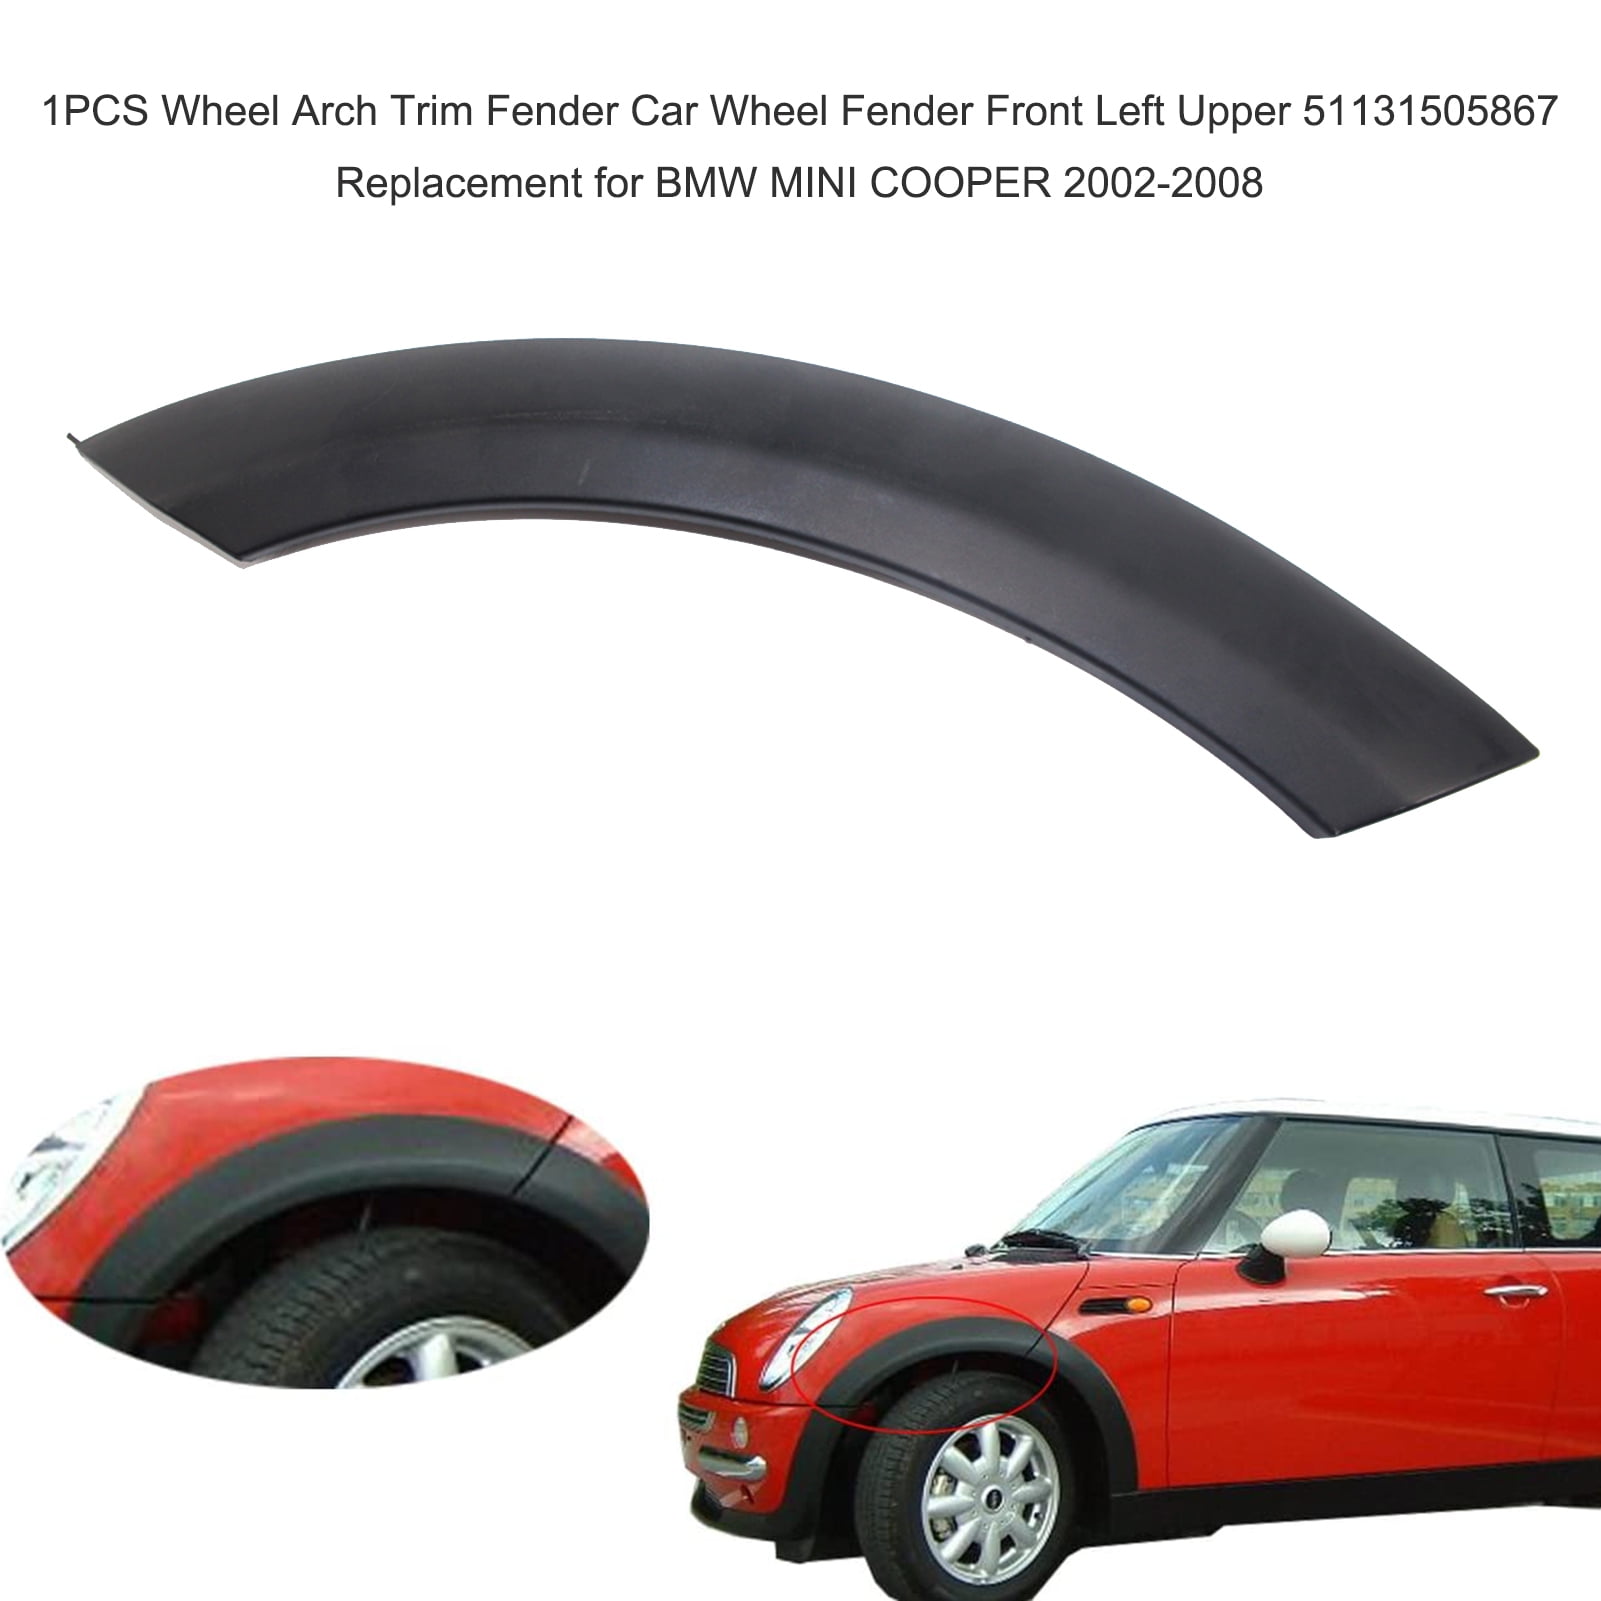 Fits for BMW Mini Cooper 2002-2008,OE#51131505867 Wheel Arch Trim for Hood Front Driver Left Side JahyShow Fender Flares for Mini Cooper 